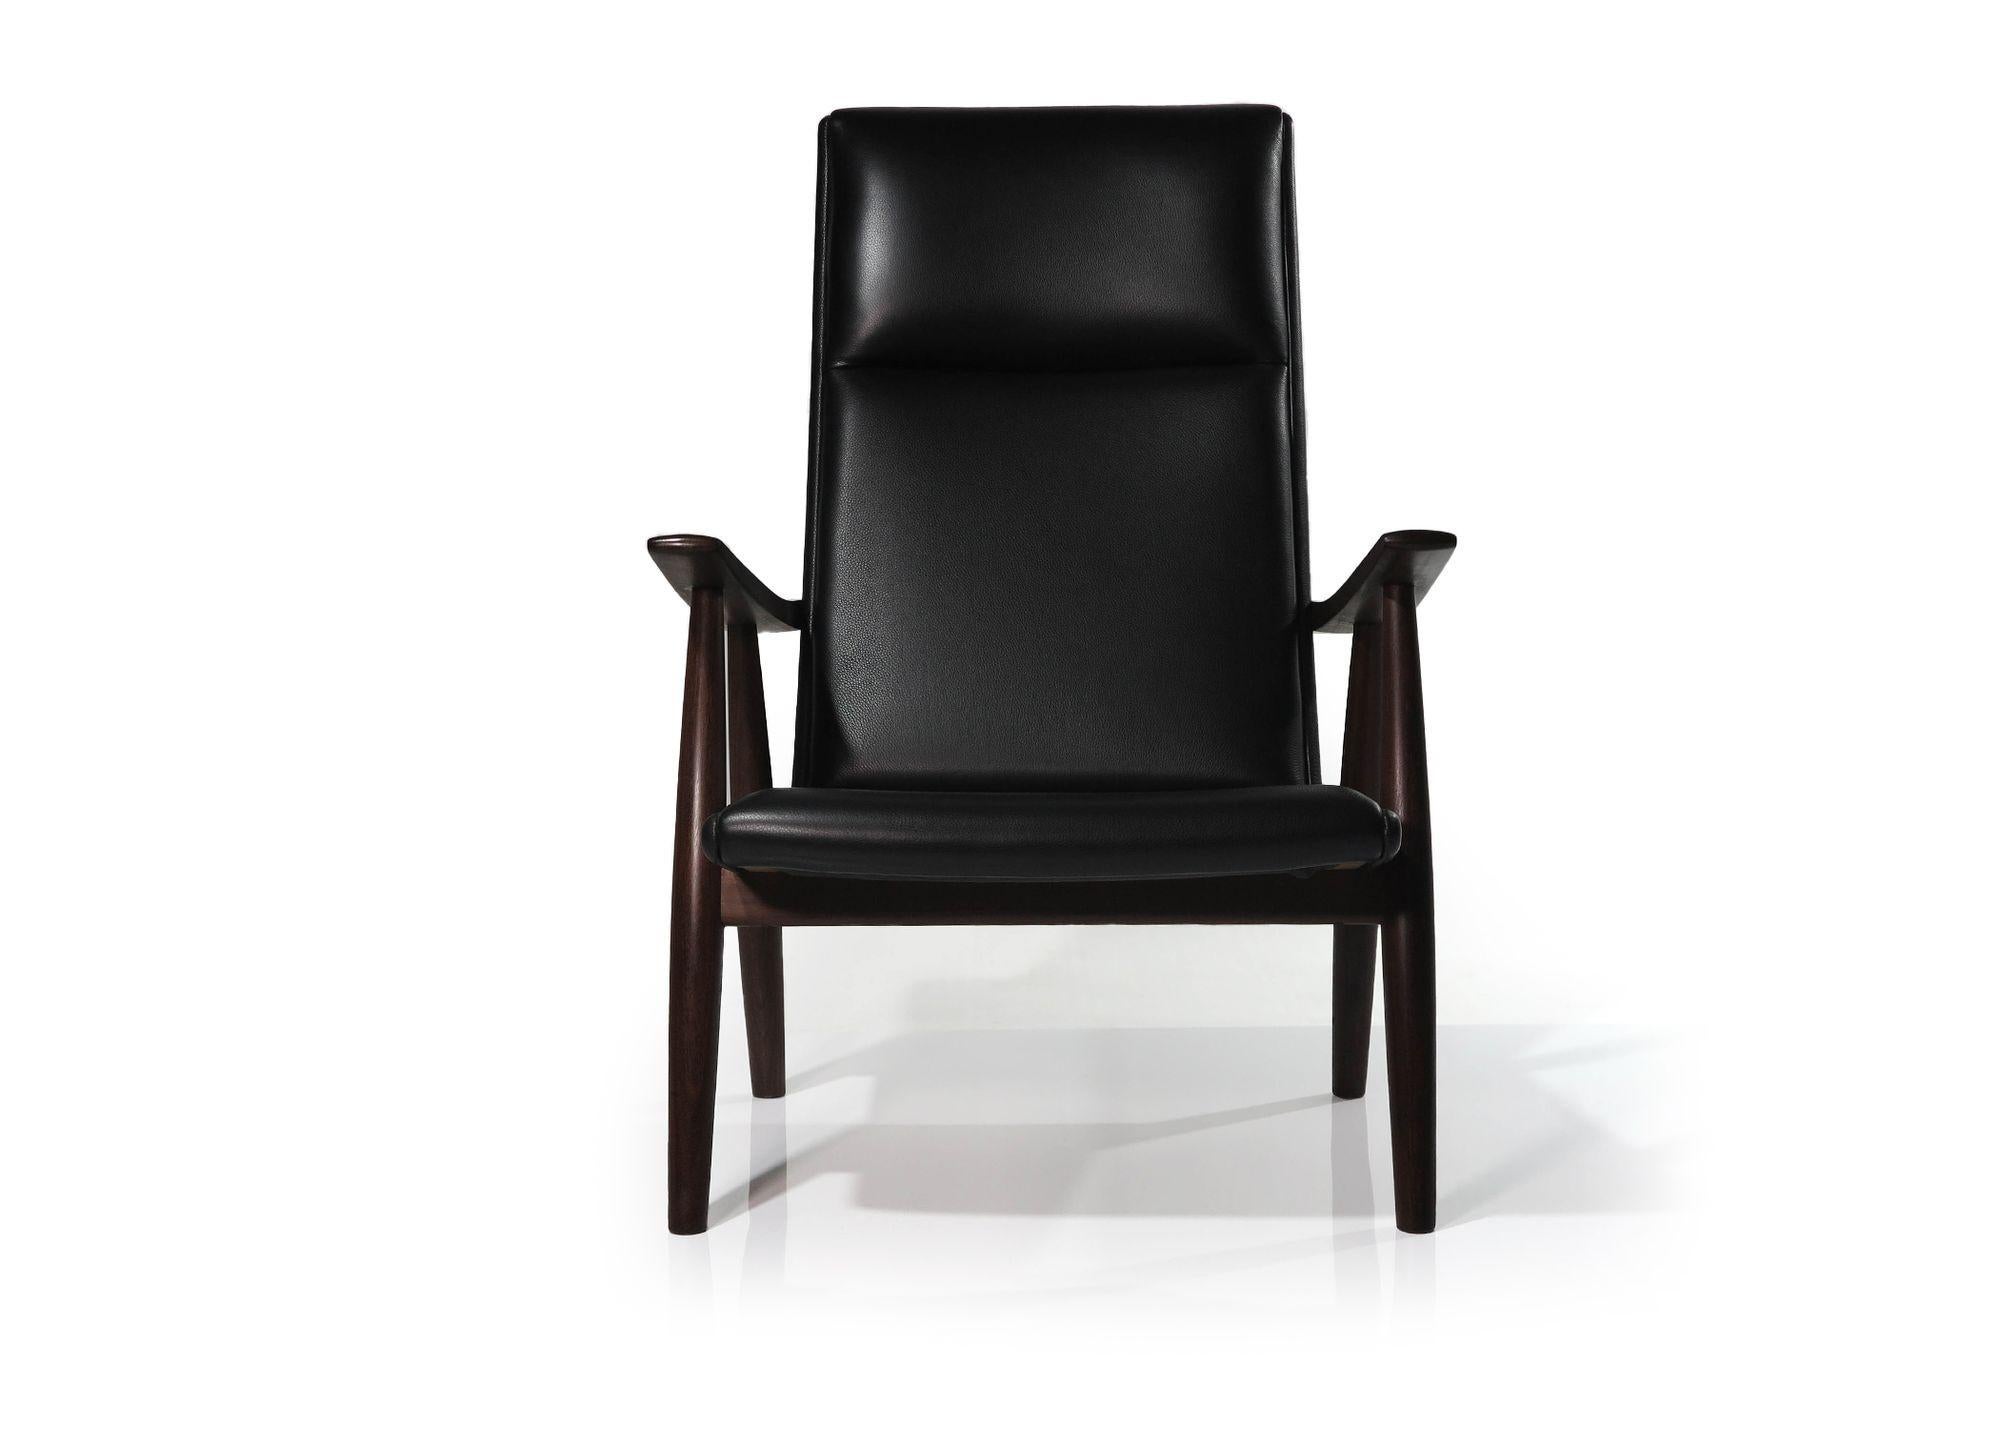 Danish high back lounge chair designed by Hans Wegner for Getama, 1955, Denmark. The chair is crafted of dark teak with sloping arms, and newly upholstered in a fine black leather. 
Measurements W 26.50'' x D 32.50'' x H 40''
Seat Height 15''.